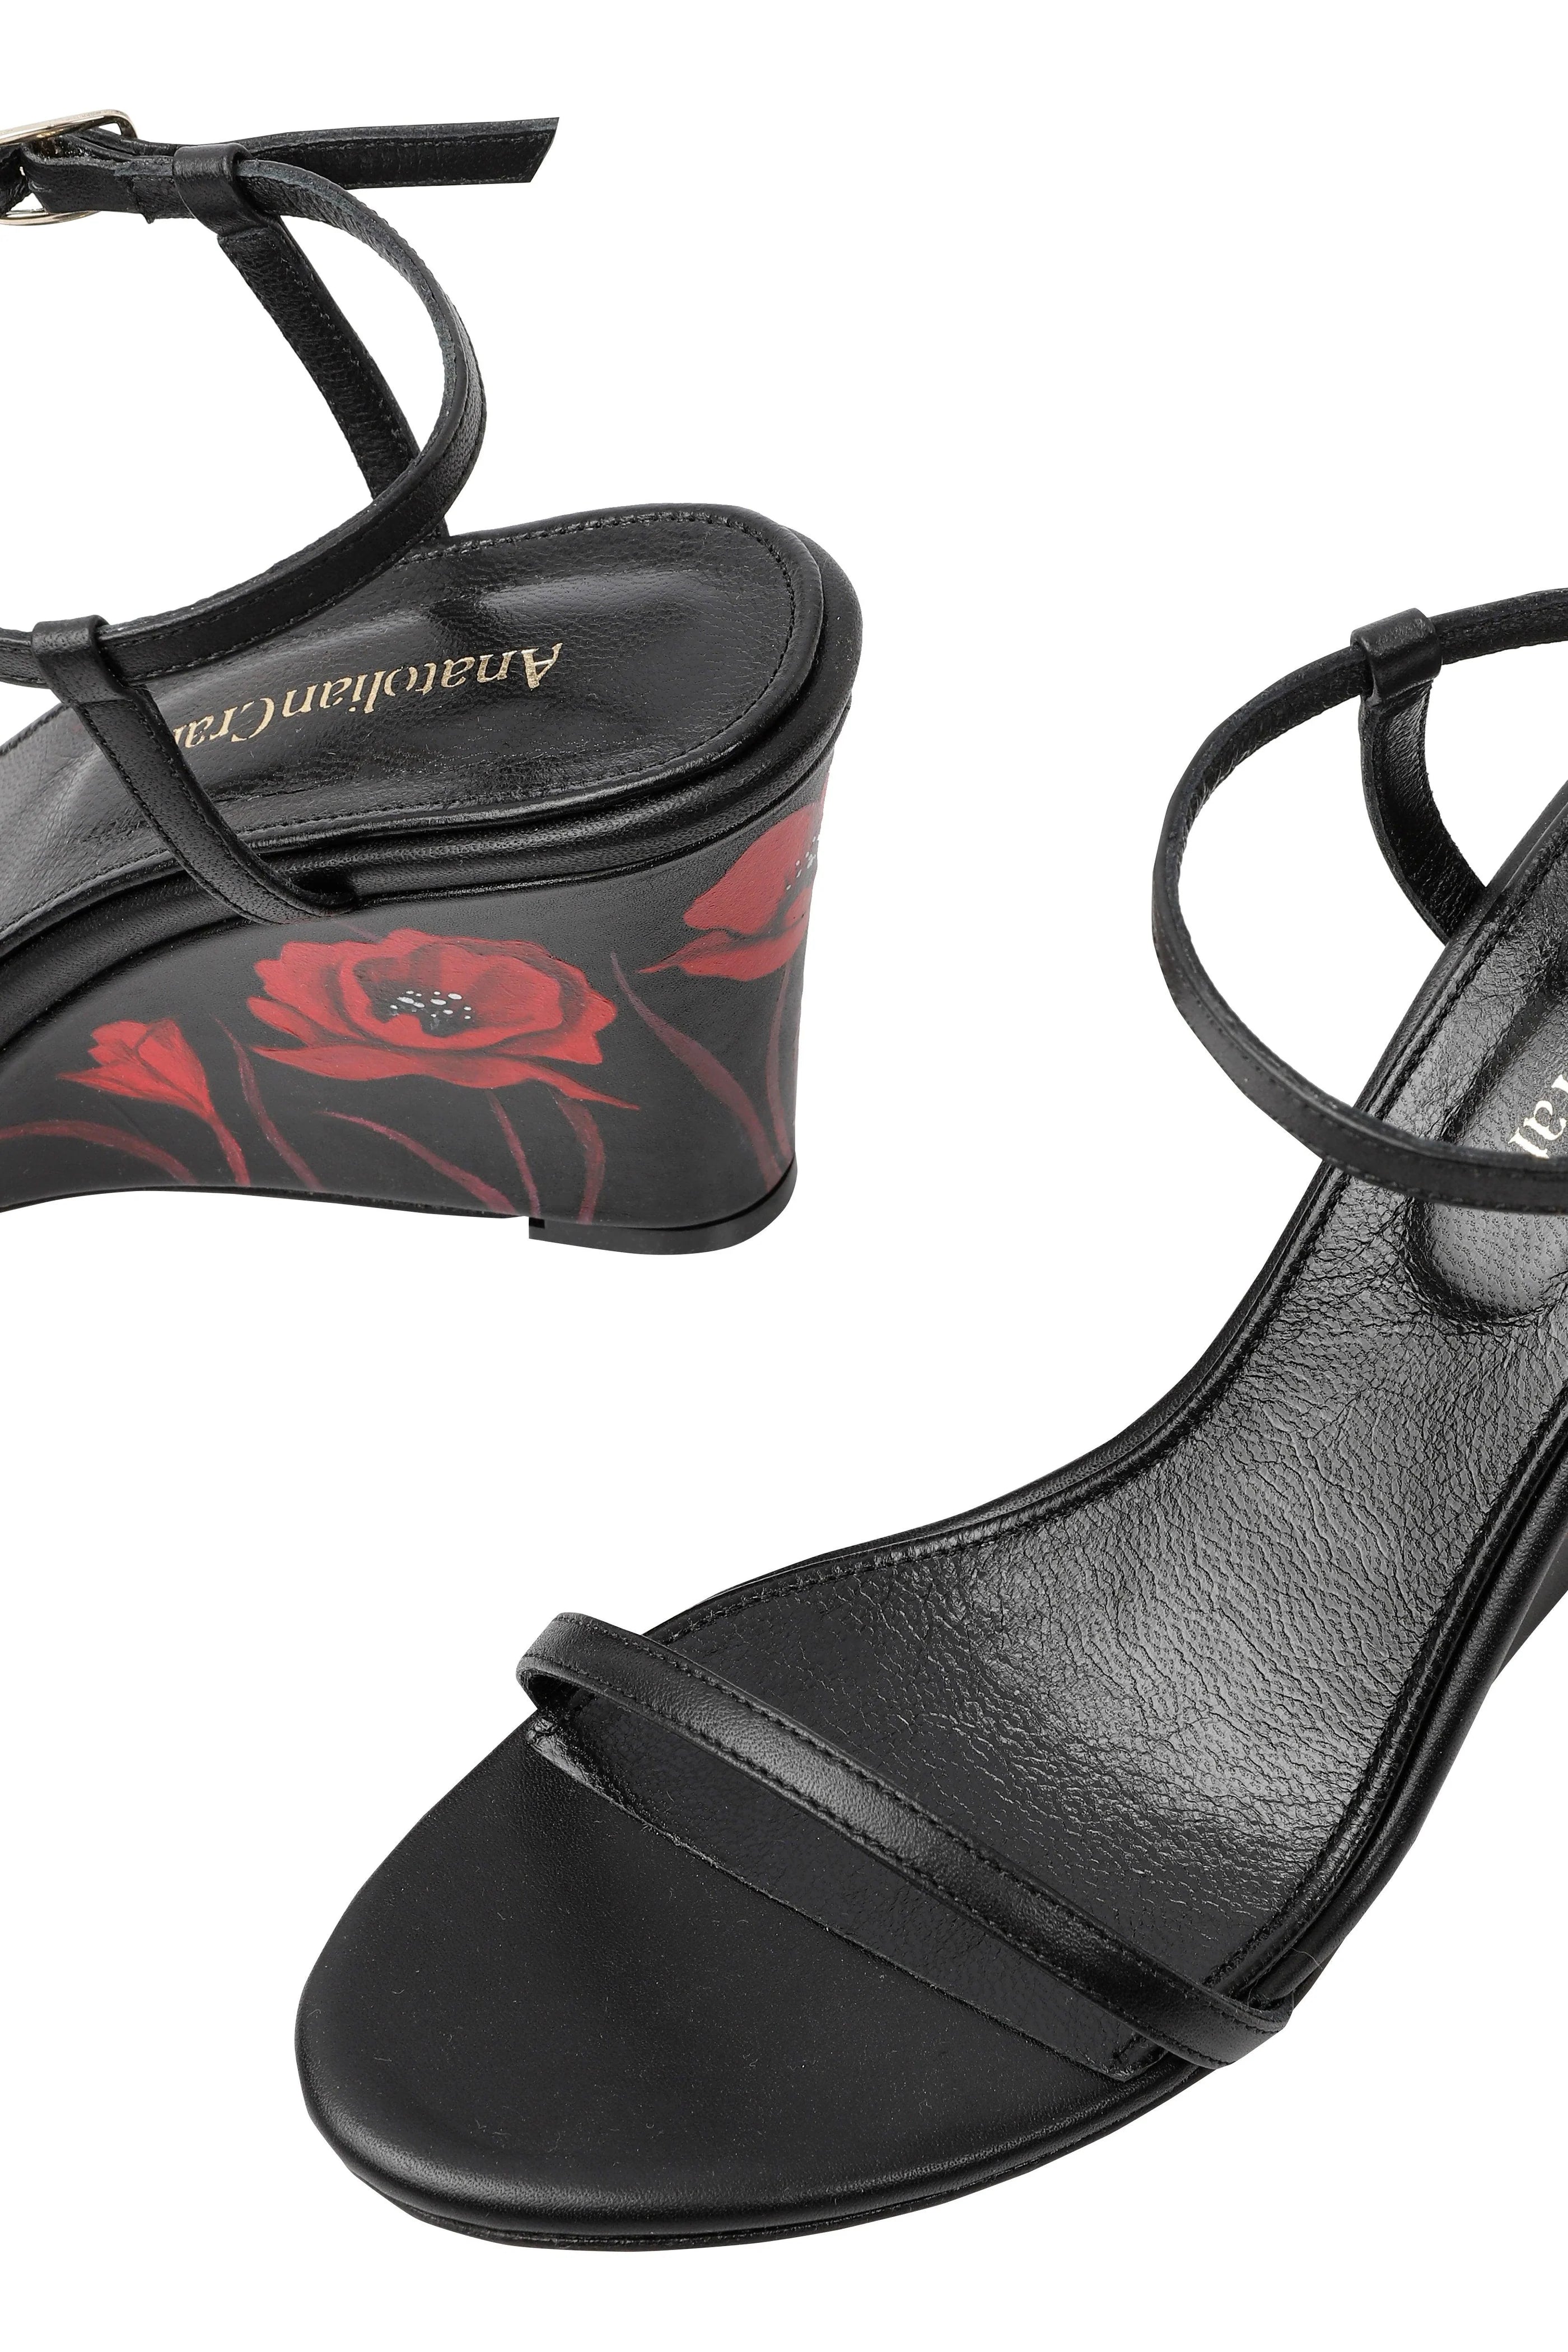 Whispering Poppies Hand-Painted Wedged Sandals